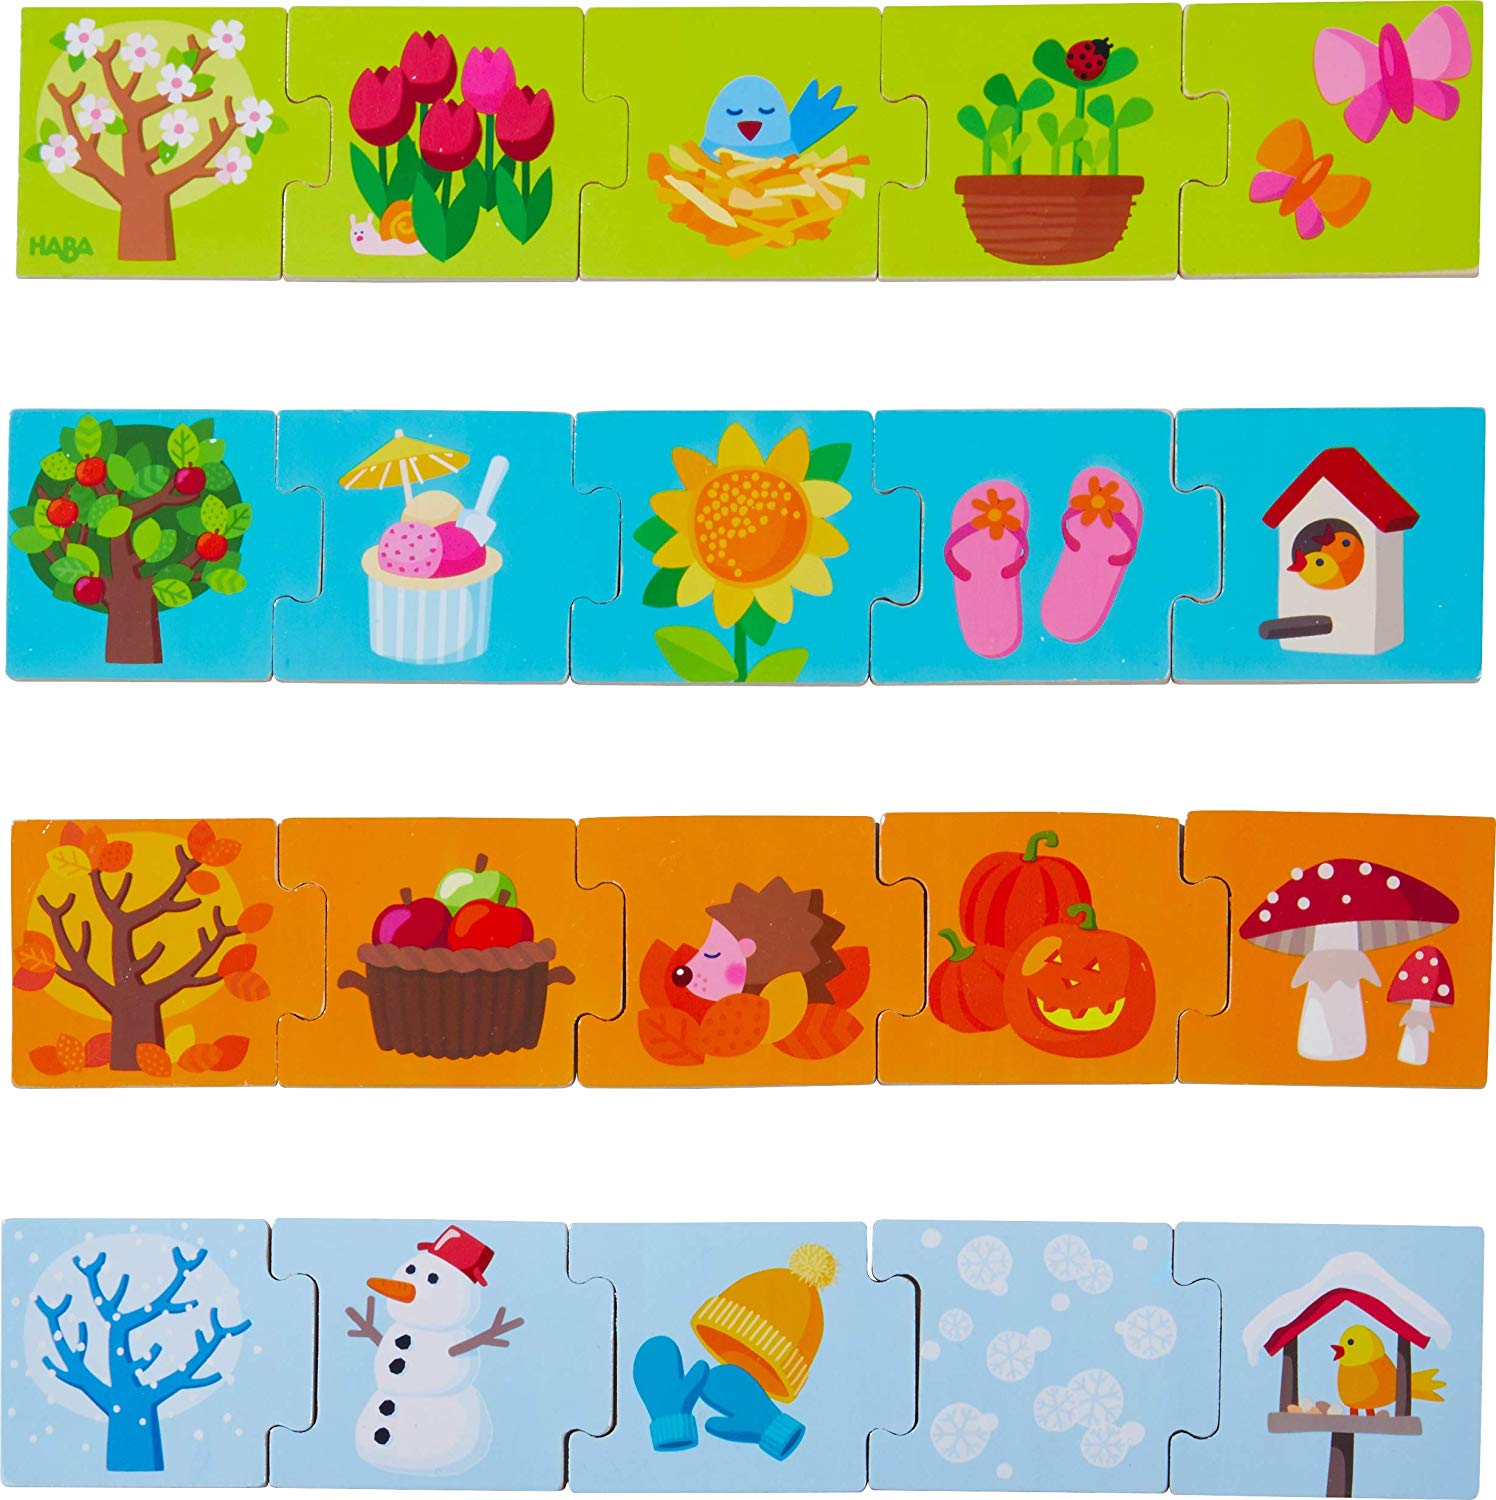 Haba 304259 Seasons Sorting Game For Playful Learning To Meet The Seasons 2